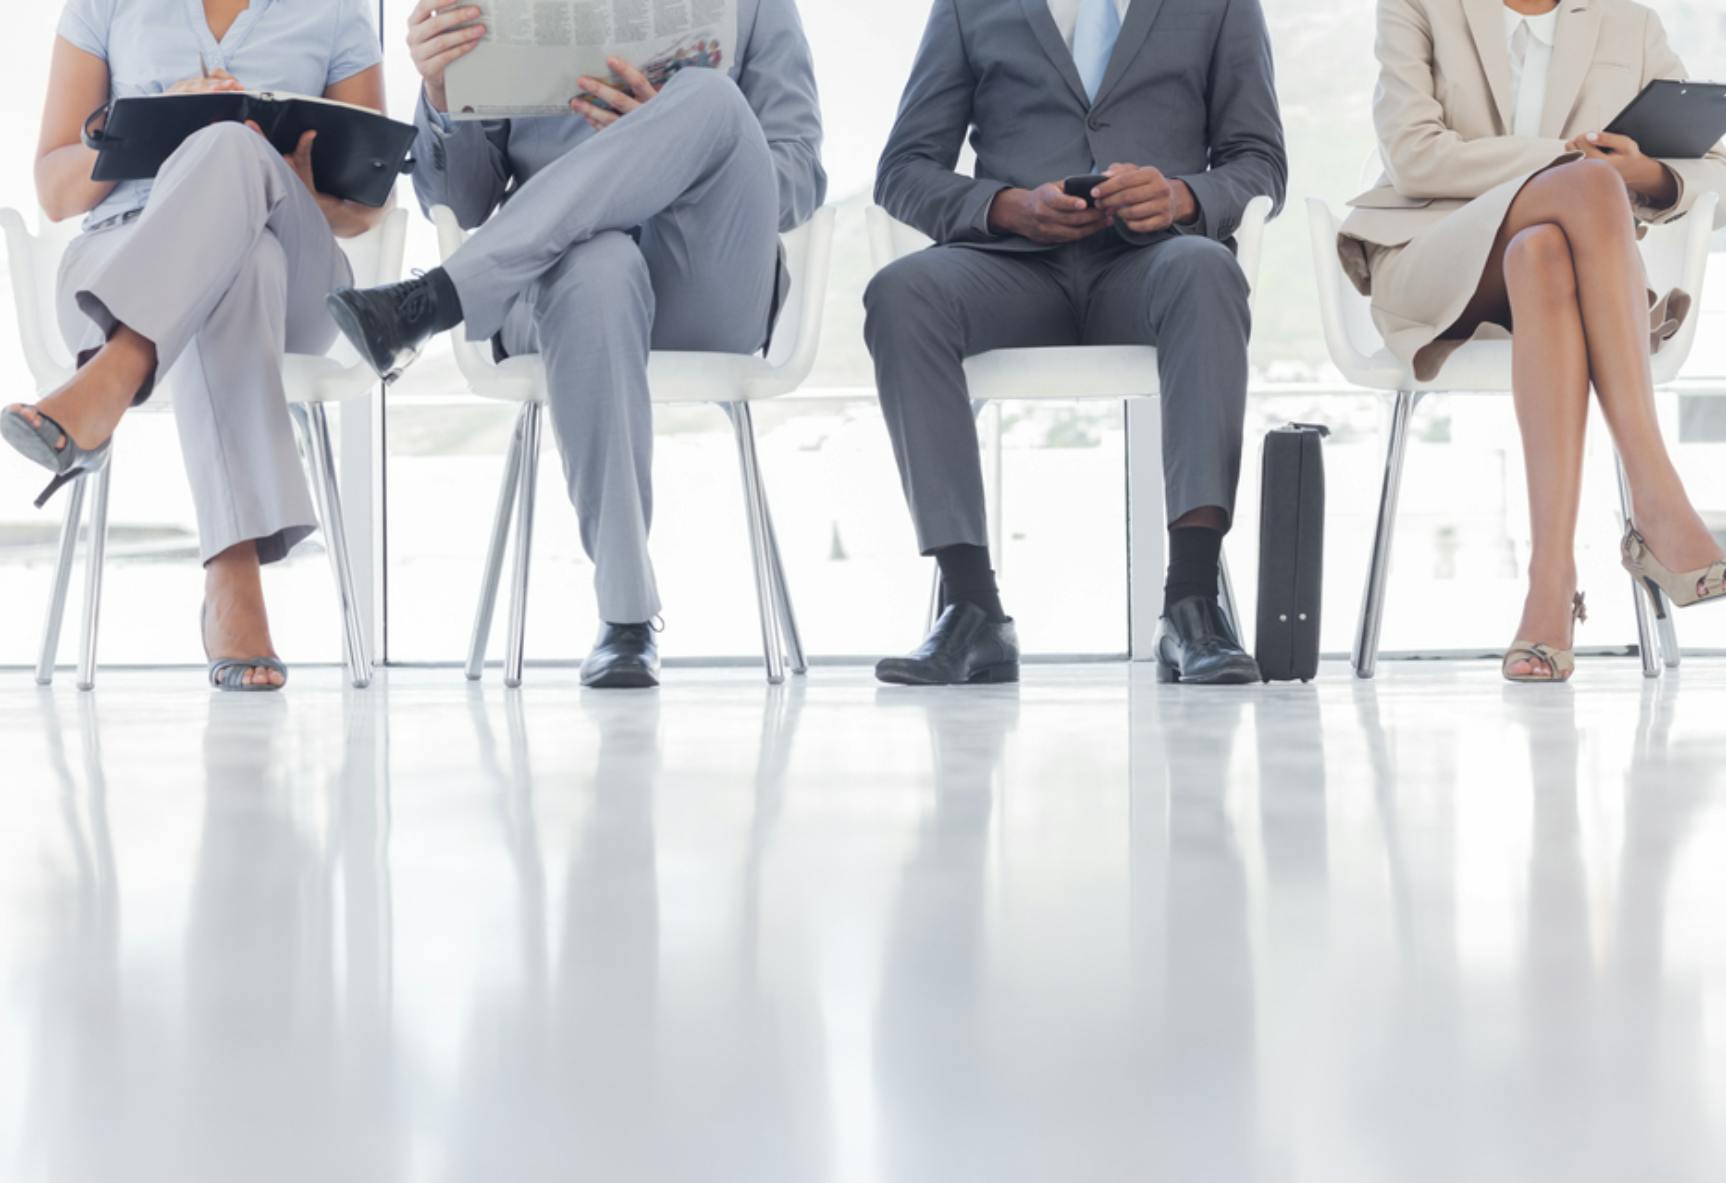 Image shows legs of four people sitting in a row. Related to VA HR modernization plan, hr modernization, human resources and AI, human resources digital tools, cyber workforce.